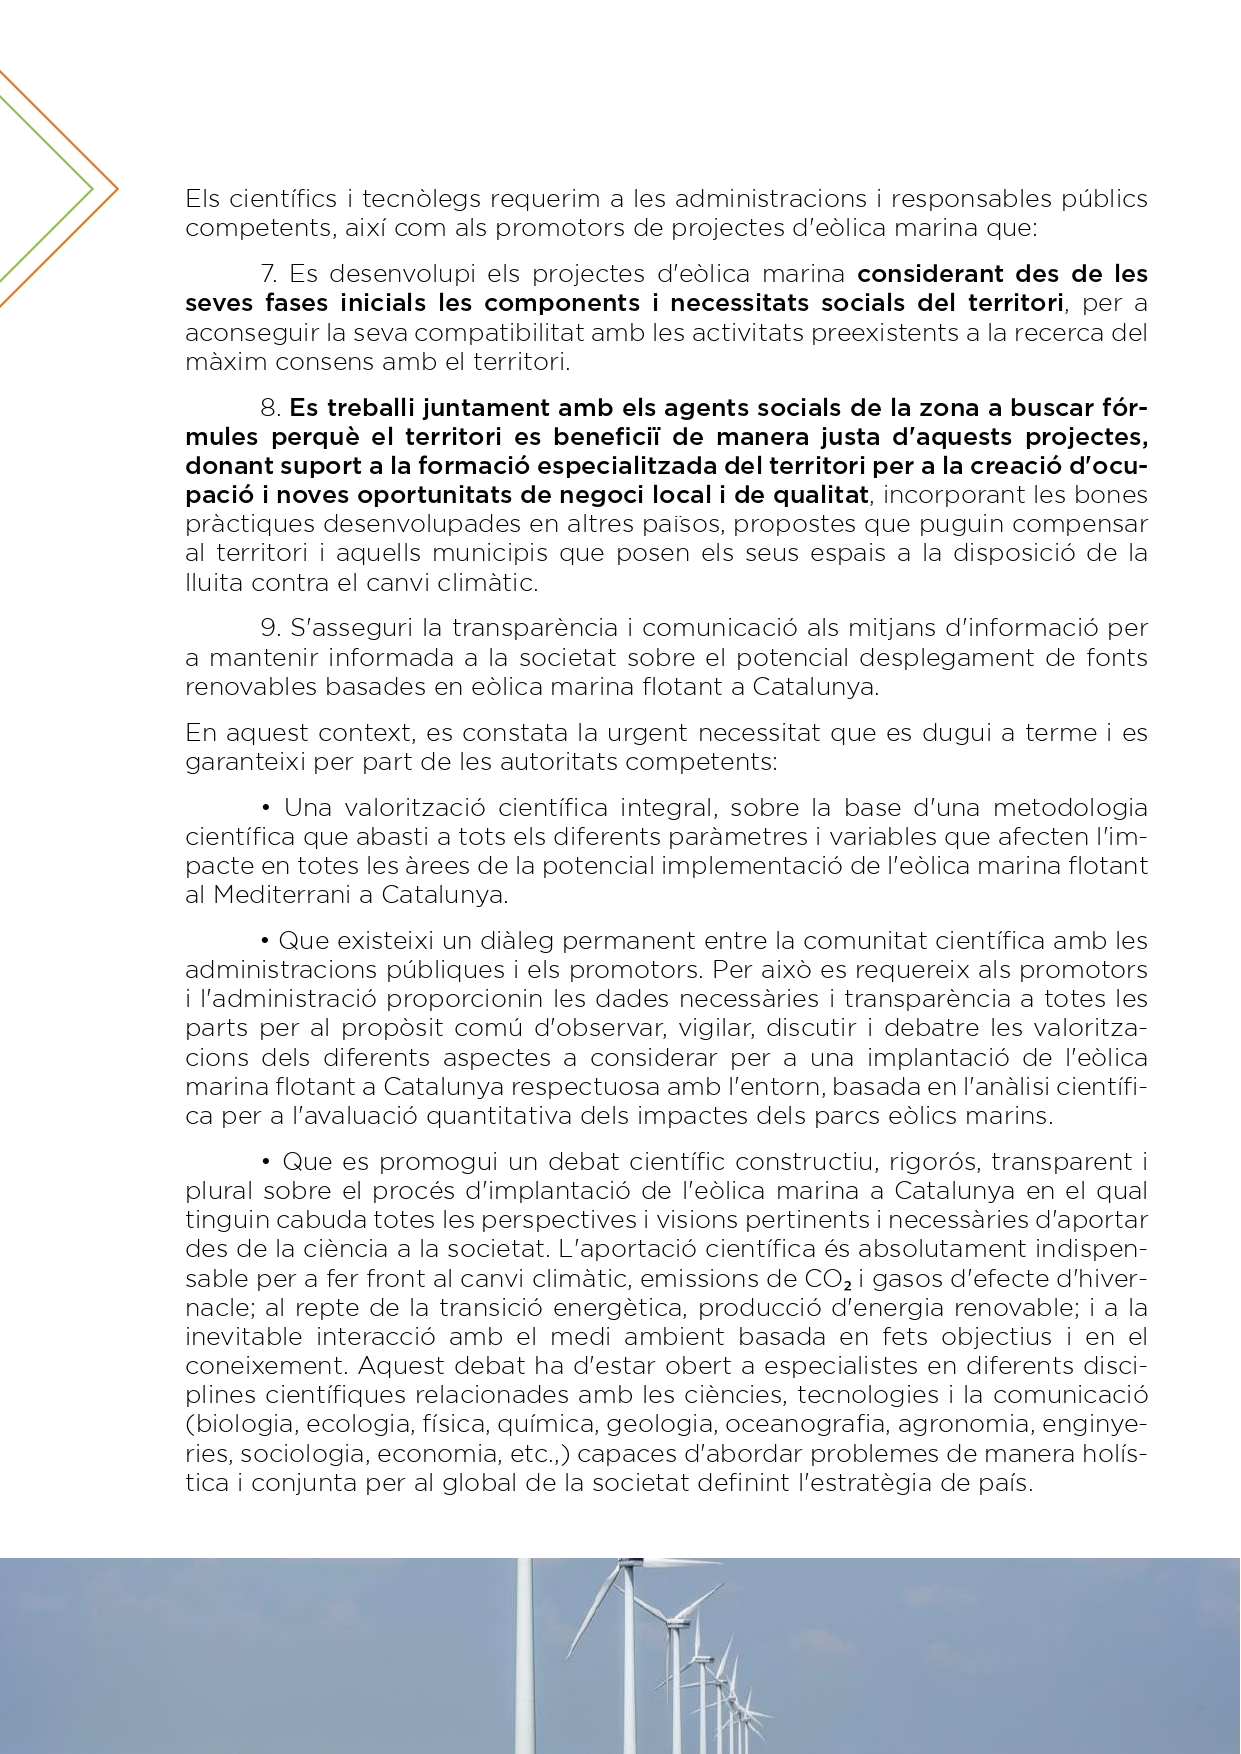 Manifiesto_IREC_CAT_v1_compressed_page-0005.jpg